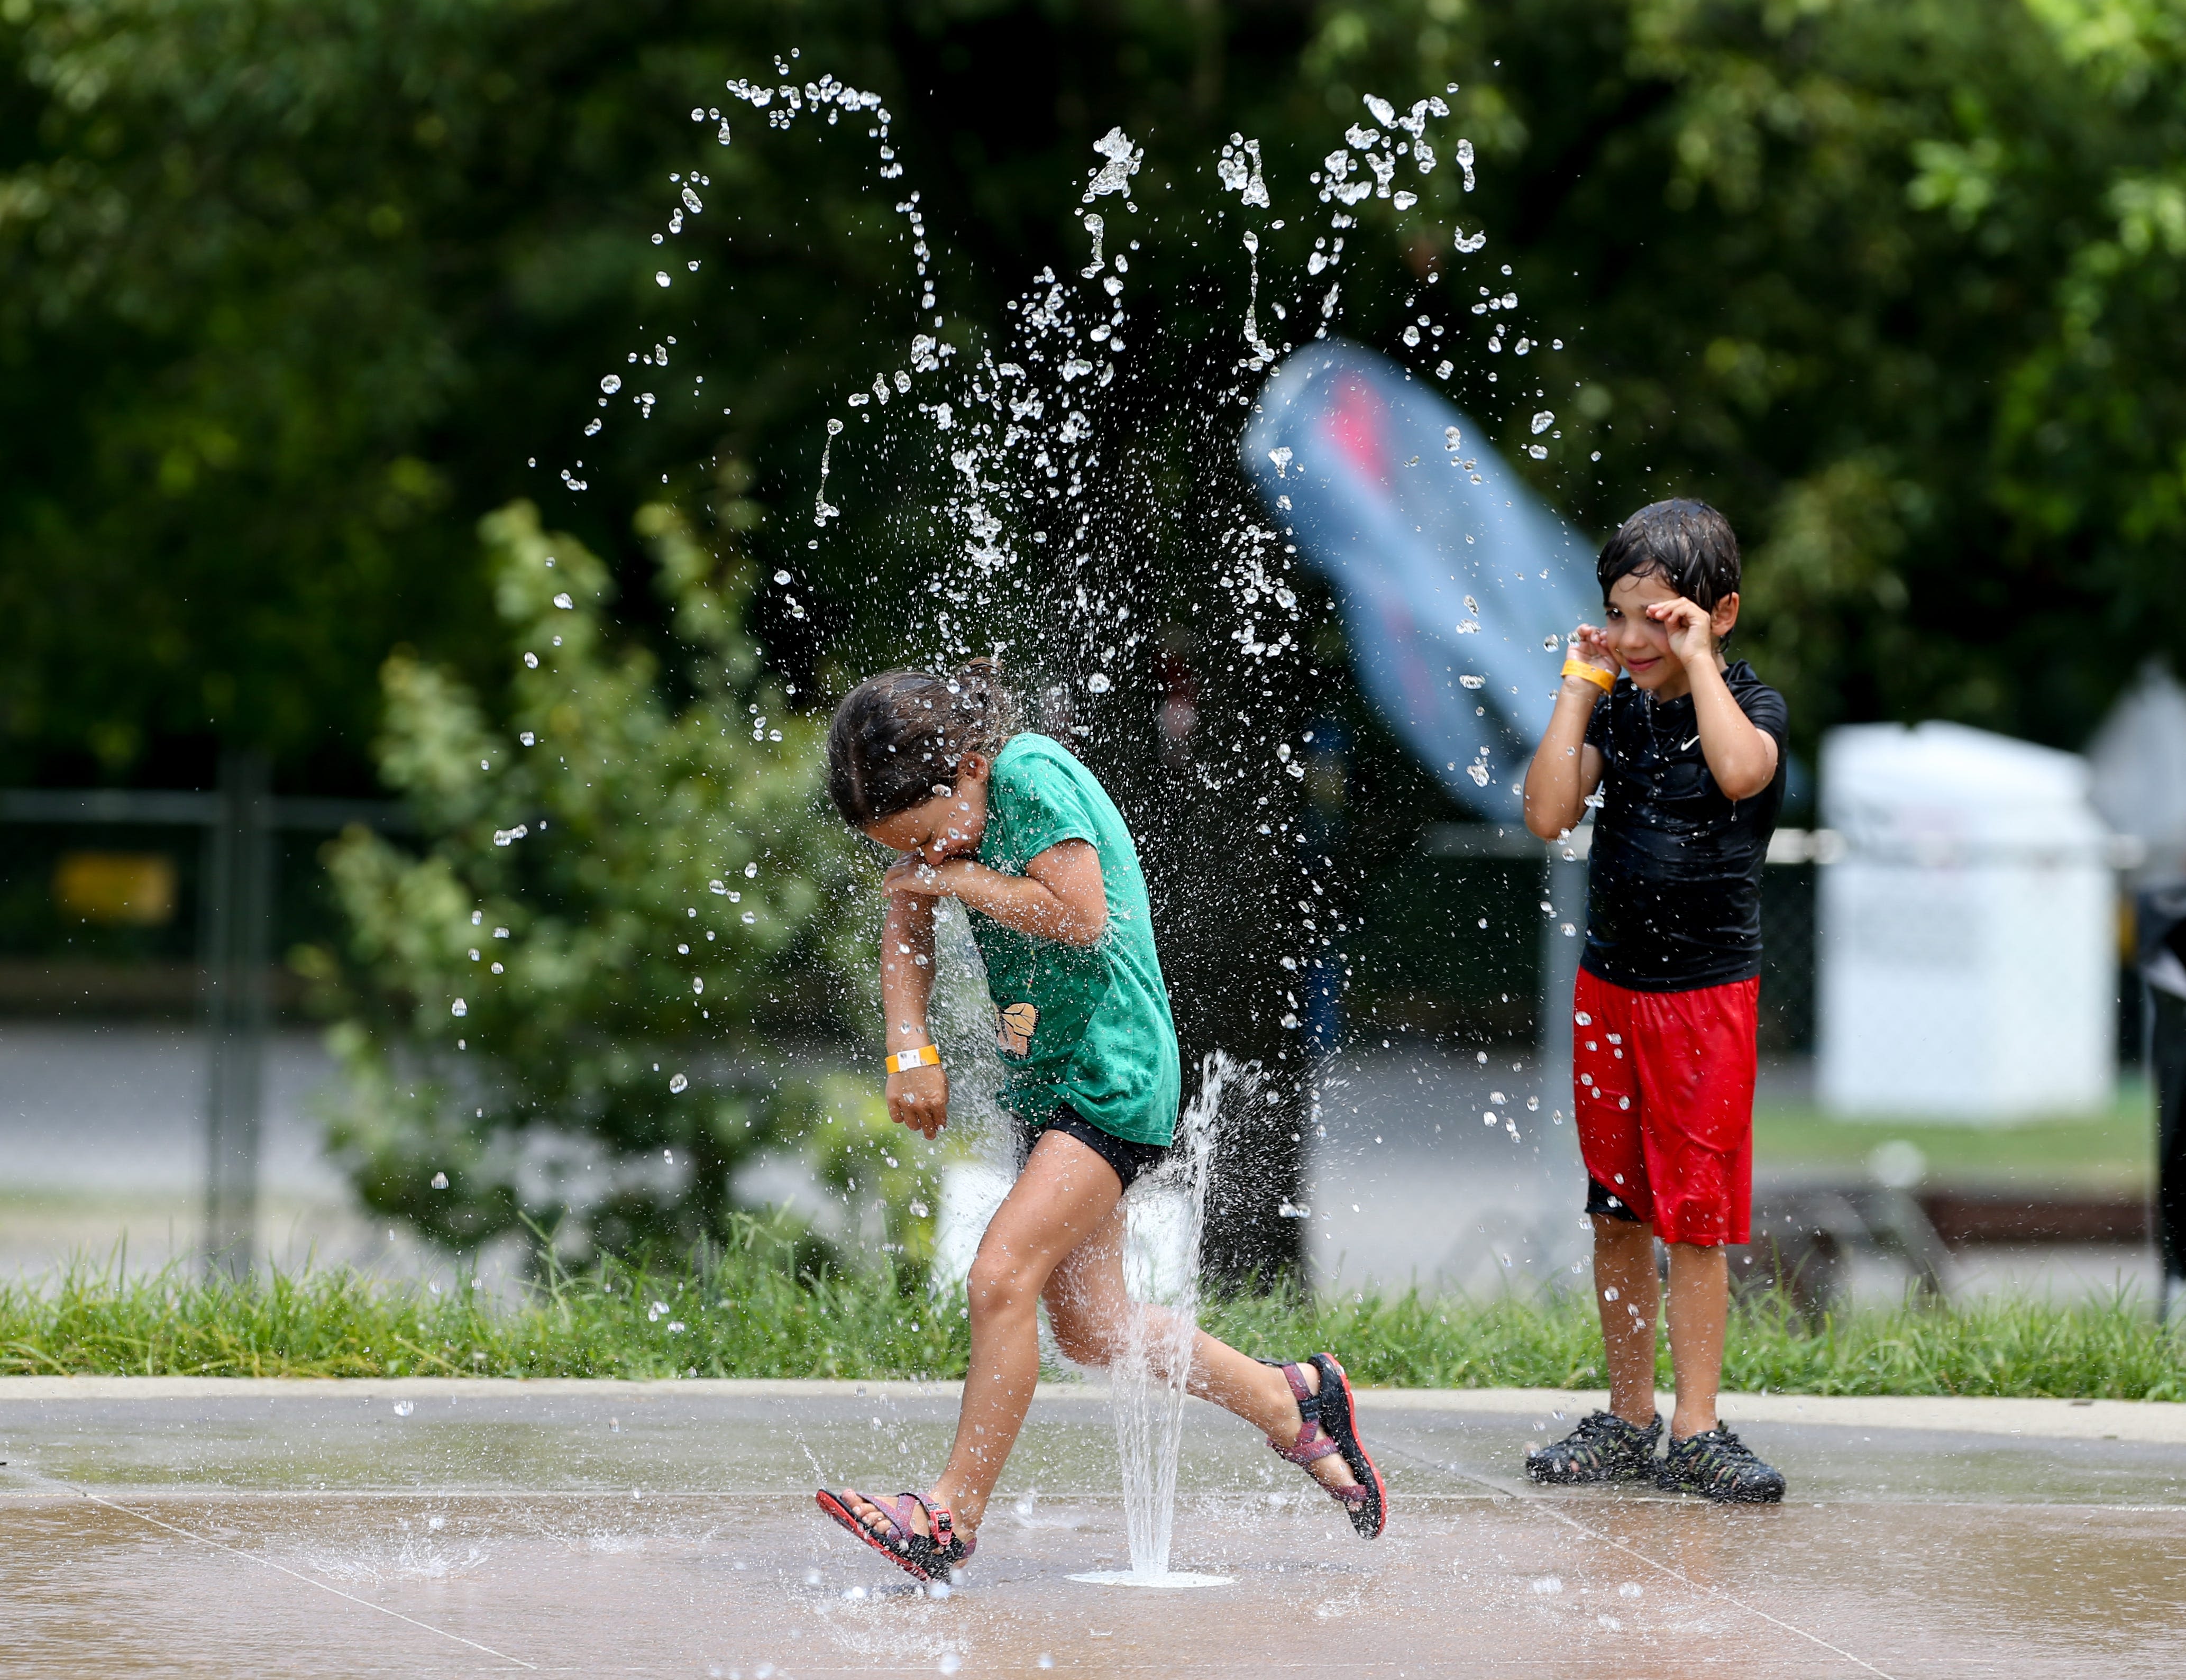 Fun in the sun: Louisville parks with spray pads, spraygrounds to enjoy this summer